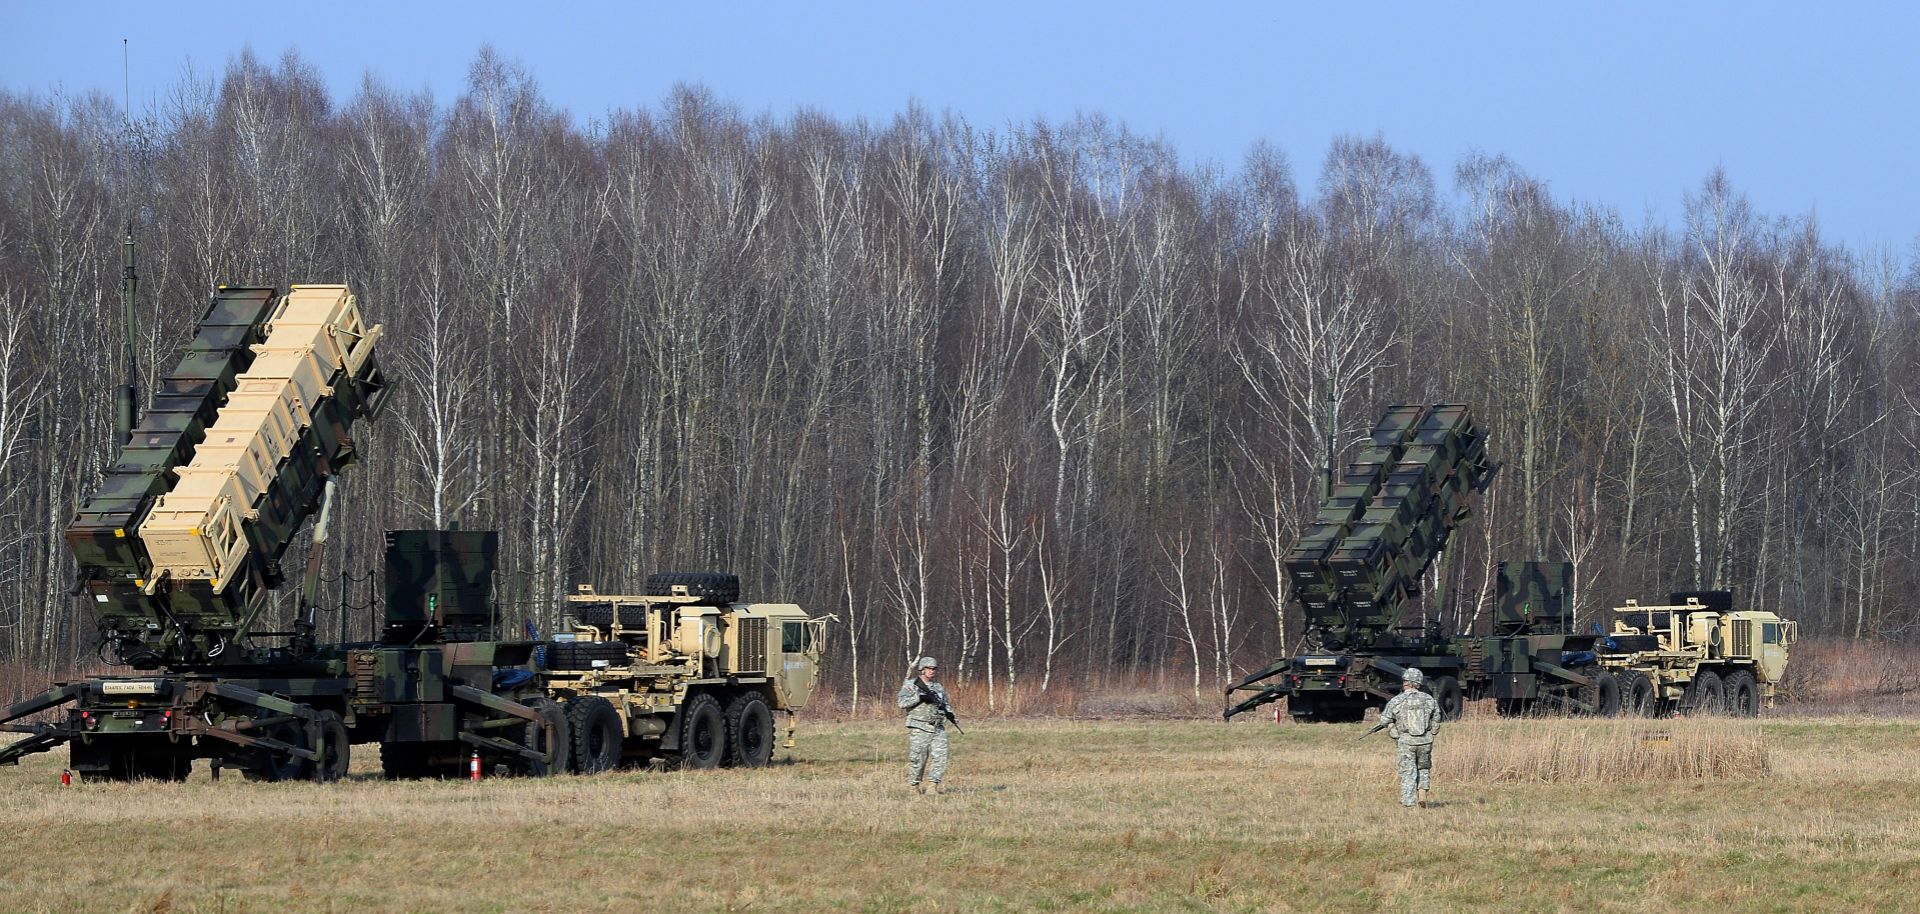 U.S. troops stand near Patriot air and missile defense systems in Sochaczew, Poland, during a 2015 military exercise meant to demonstrate the U.S. military's capacity to rapidly deploy such systems within NATO territory. 